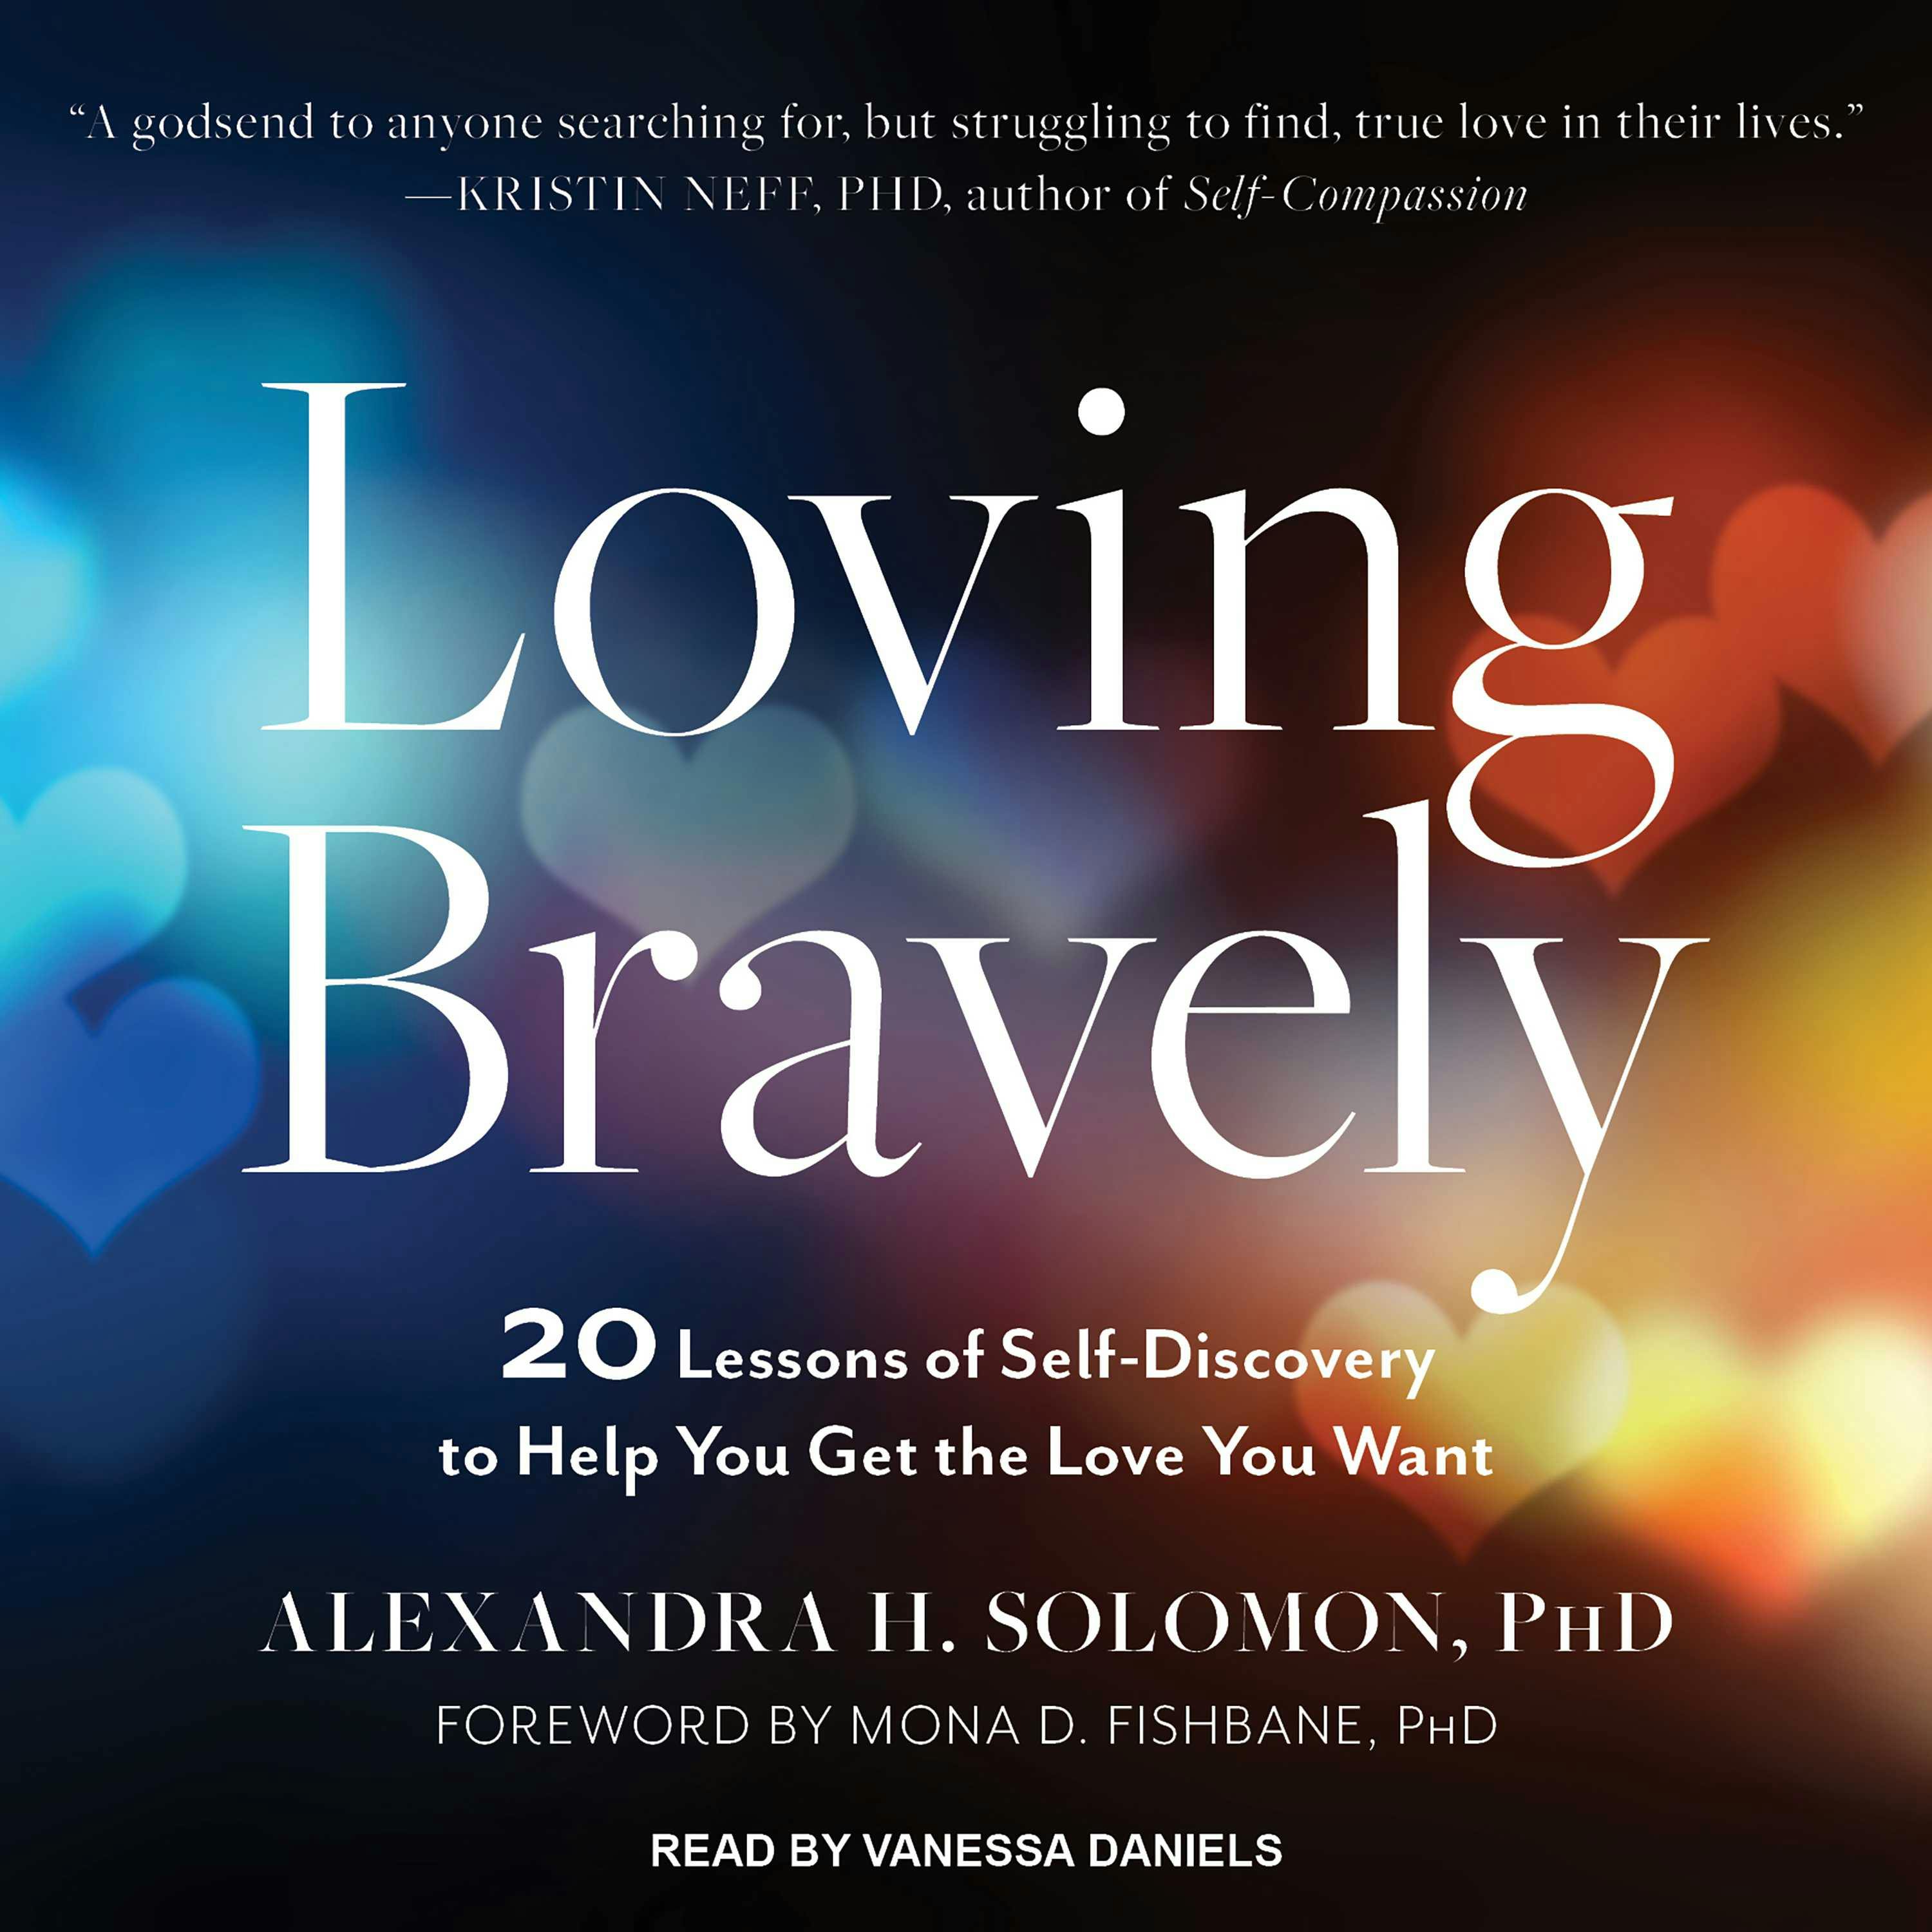 Loving Bravely: Twenty Lessons of Self-discovery to Help You Find and Keep the Love You Want - Alexandra H. Solomon, PhD